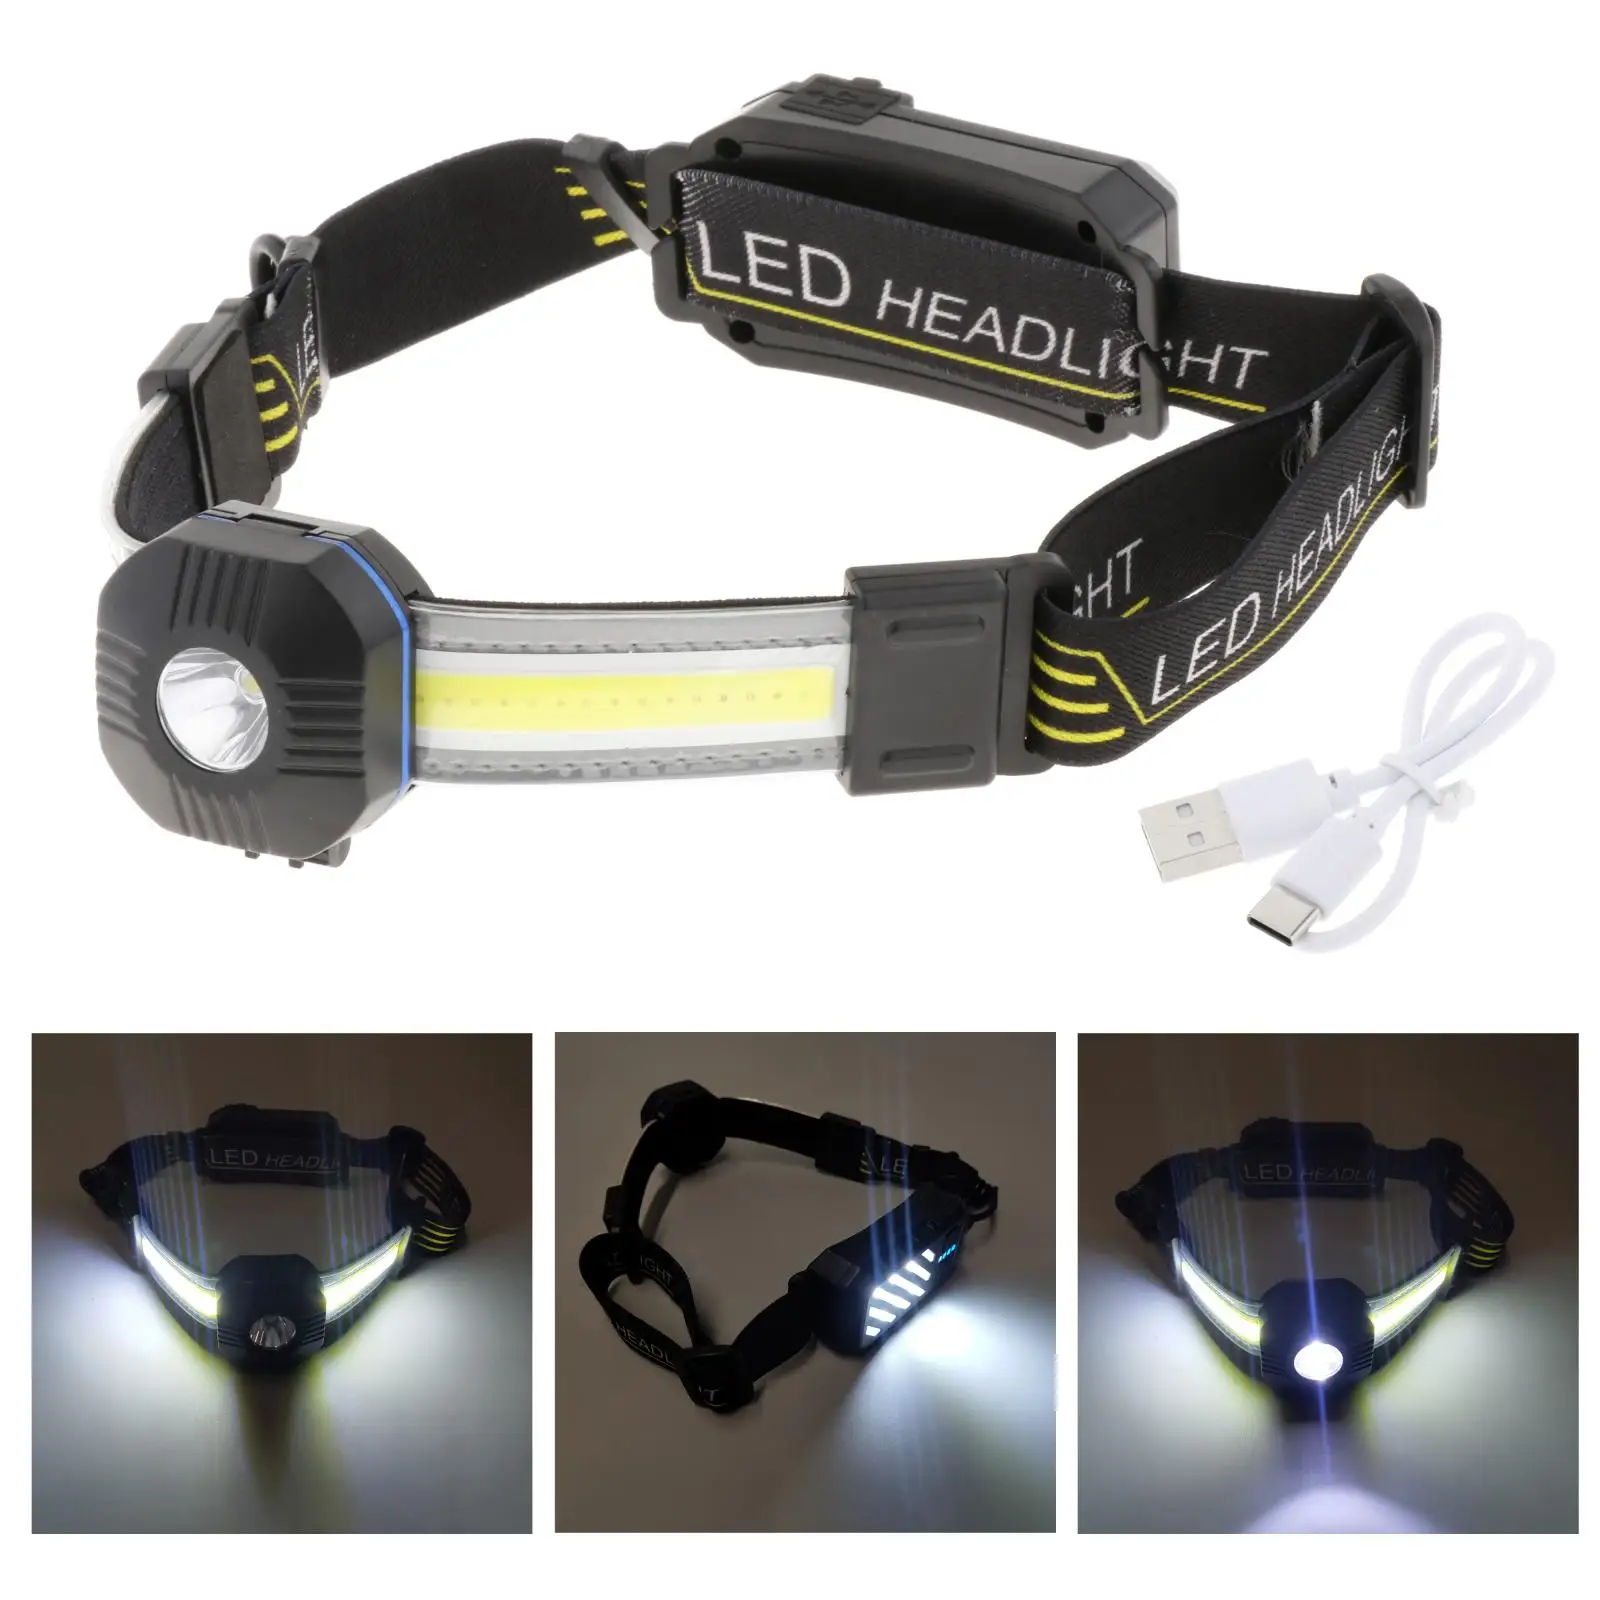 Rechargeable Headlight LED Head Torch, Waterproof Lightweight COB Headlamp Head Light for Running Cycling Camping Fishing Hiking